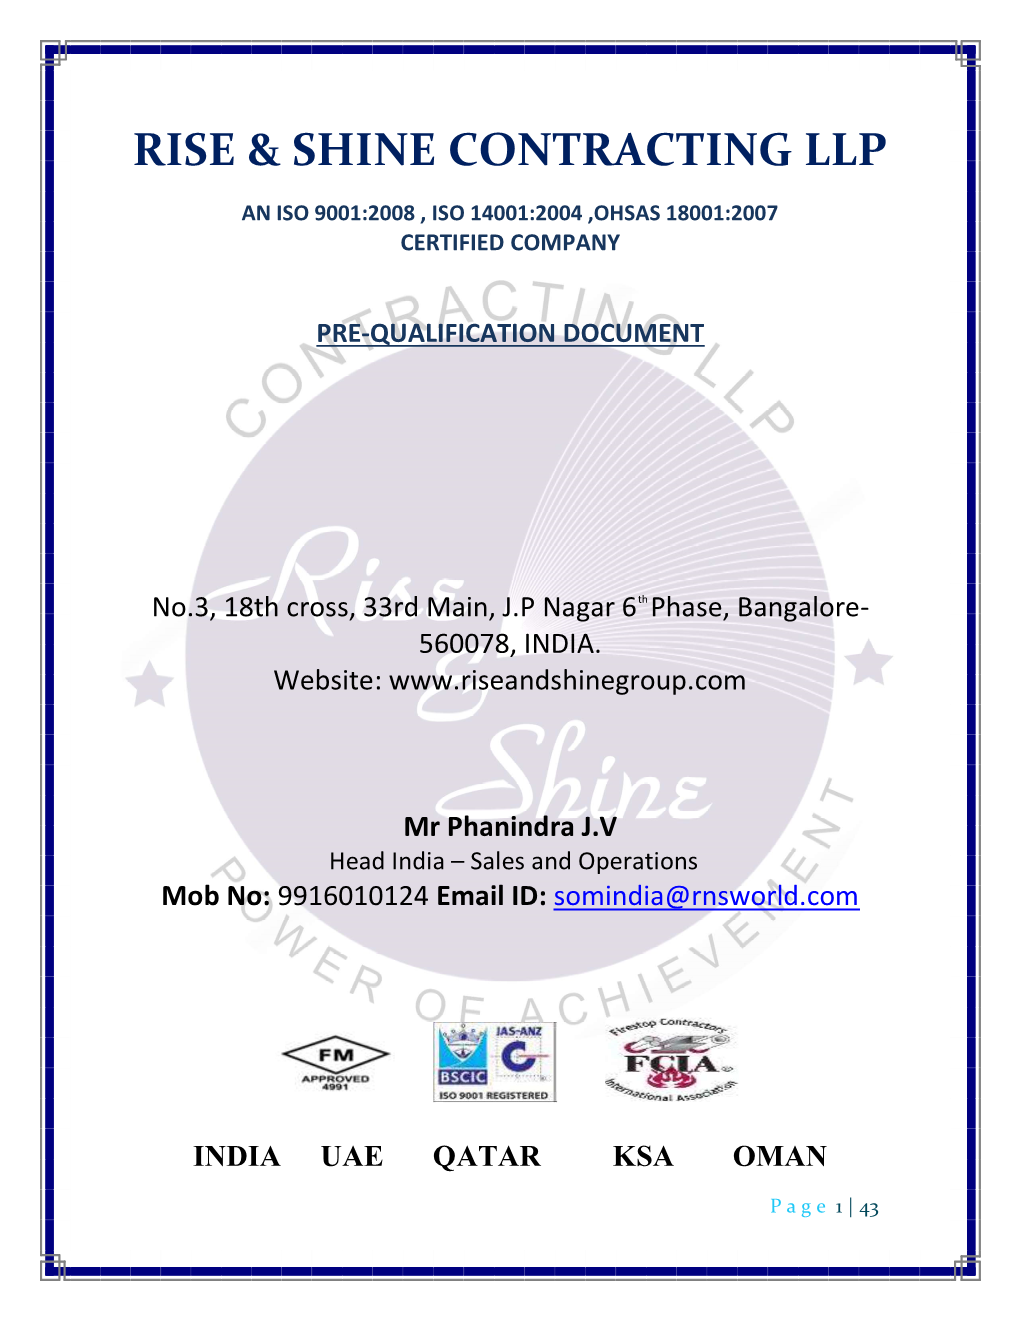 Rise & Shine Contracting